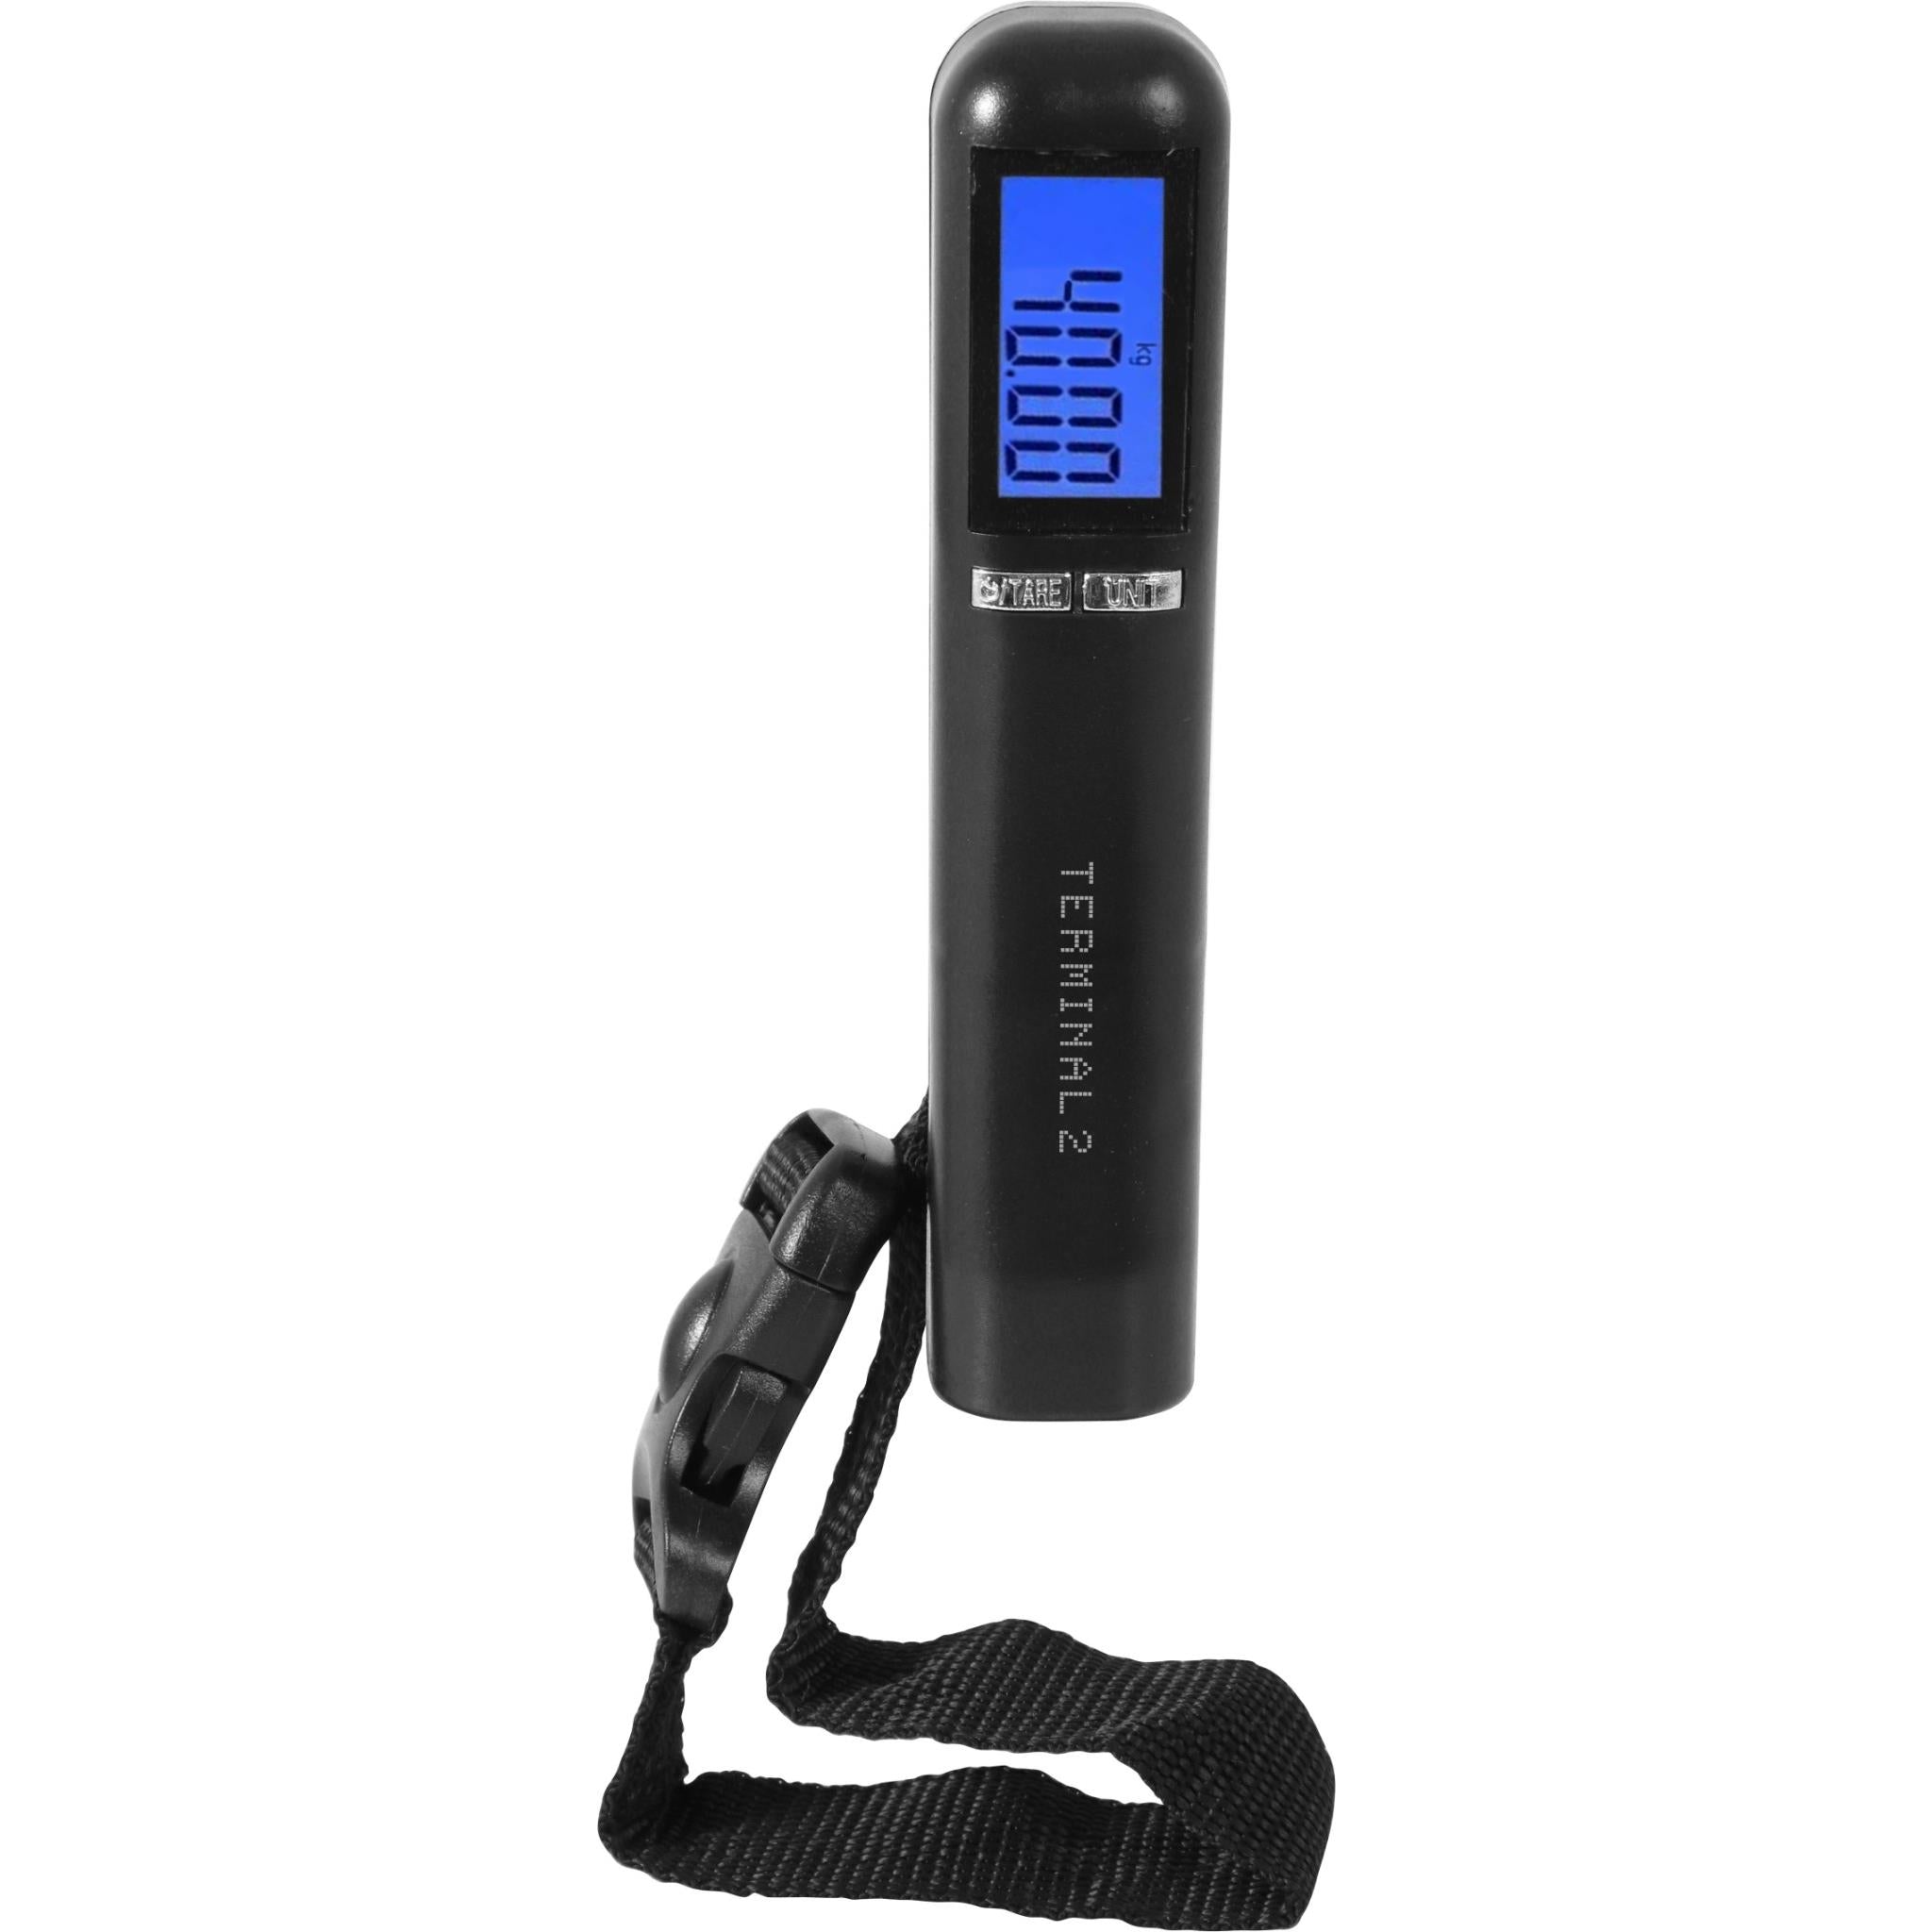 The 10 Best Digital Luggage Scales - Top Luggage Weight Scale Reviews